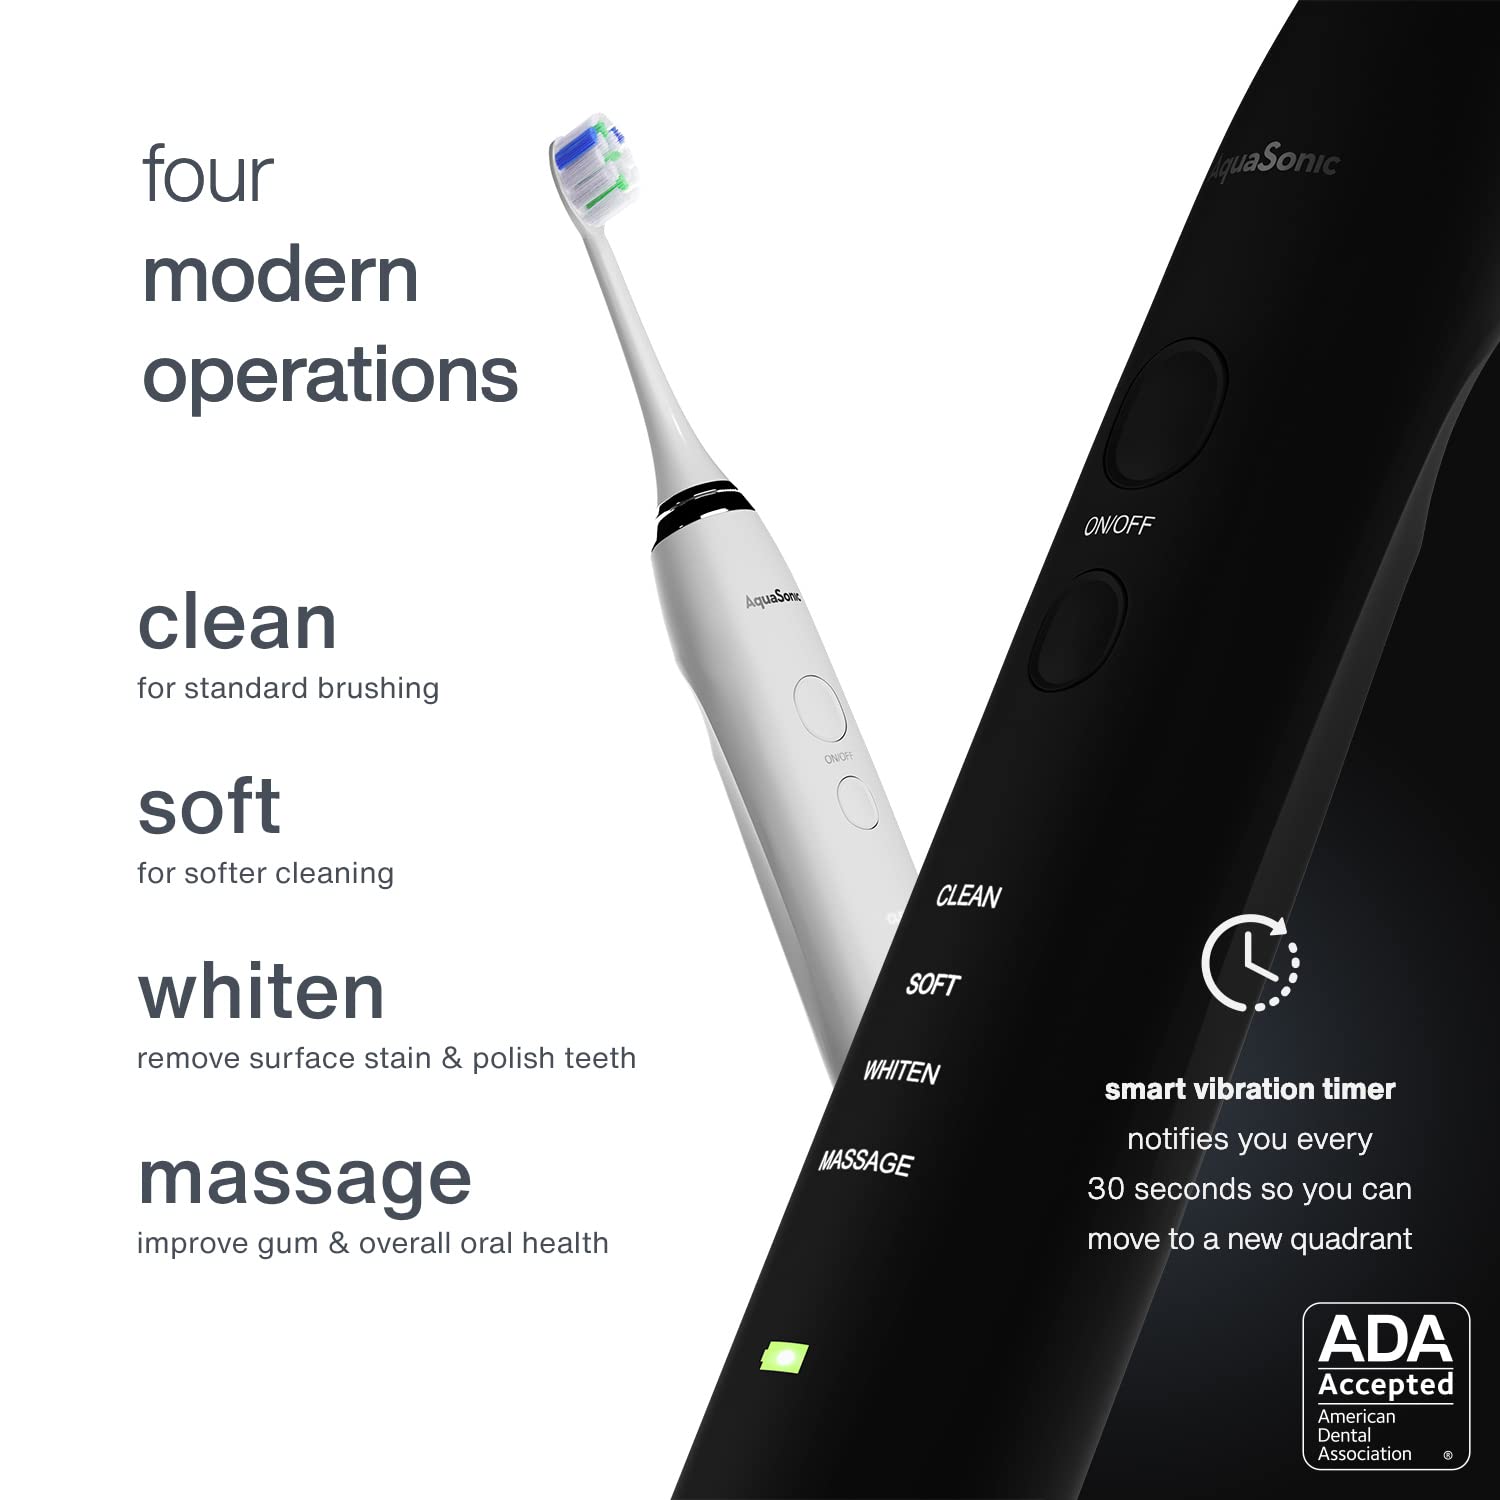 AquaSonic DUO PRO – Ultra Whitening 40,000 VPM Electric ToothBrushes – ADA Accepted - 4 Modes with Smart Timers - UV Sanitizing & Wireless Charging Base - 10 ProFlex Brush Heads & 2 Travel Cases